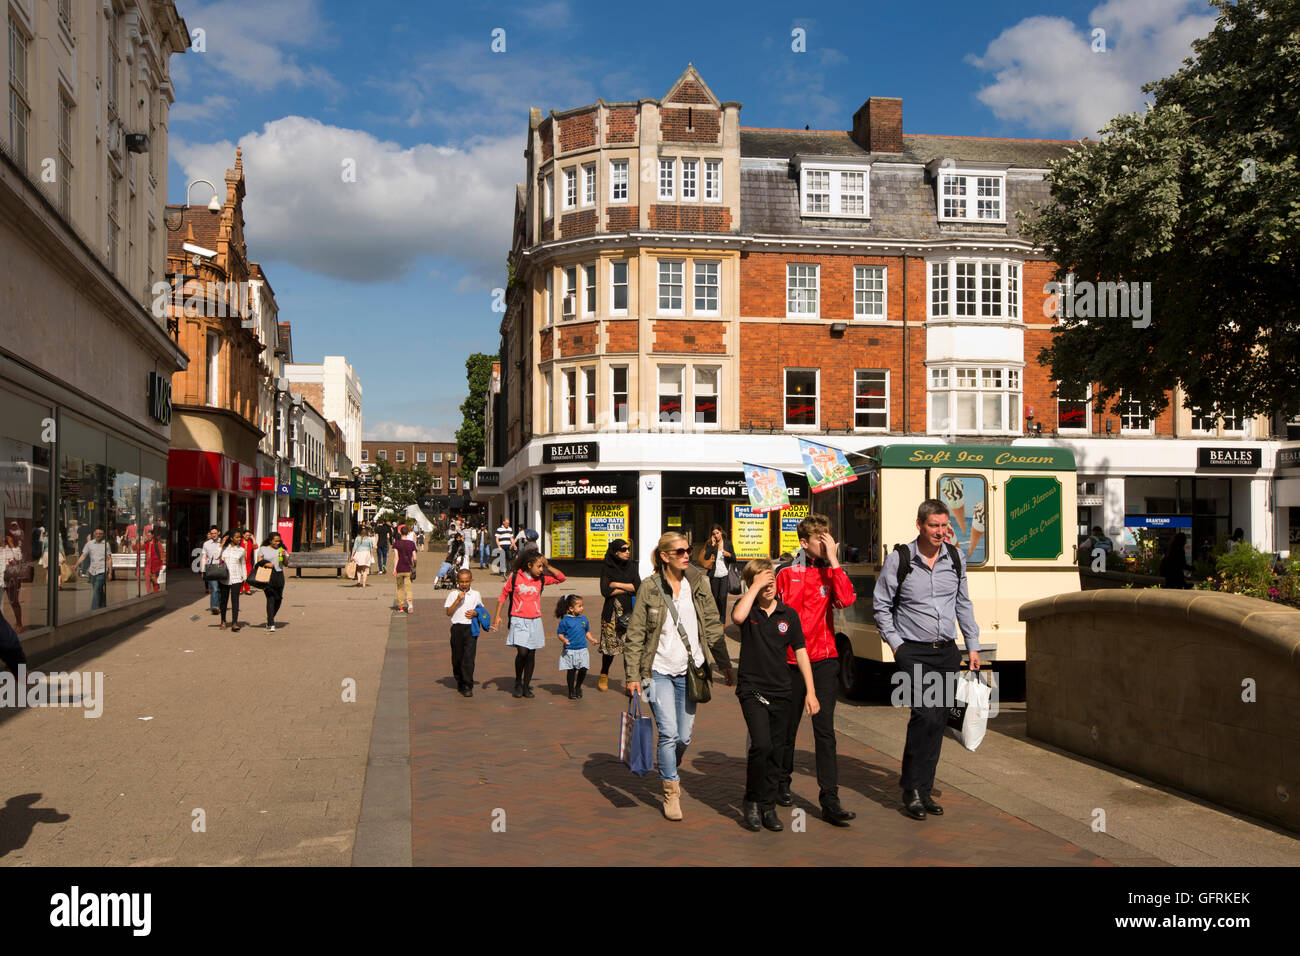 UK, England, Bedfordshire, Bedford, Midland Road, shoppers outside Beals Department Store Stock Photo